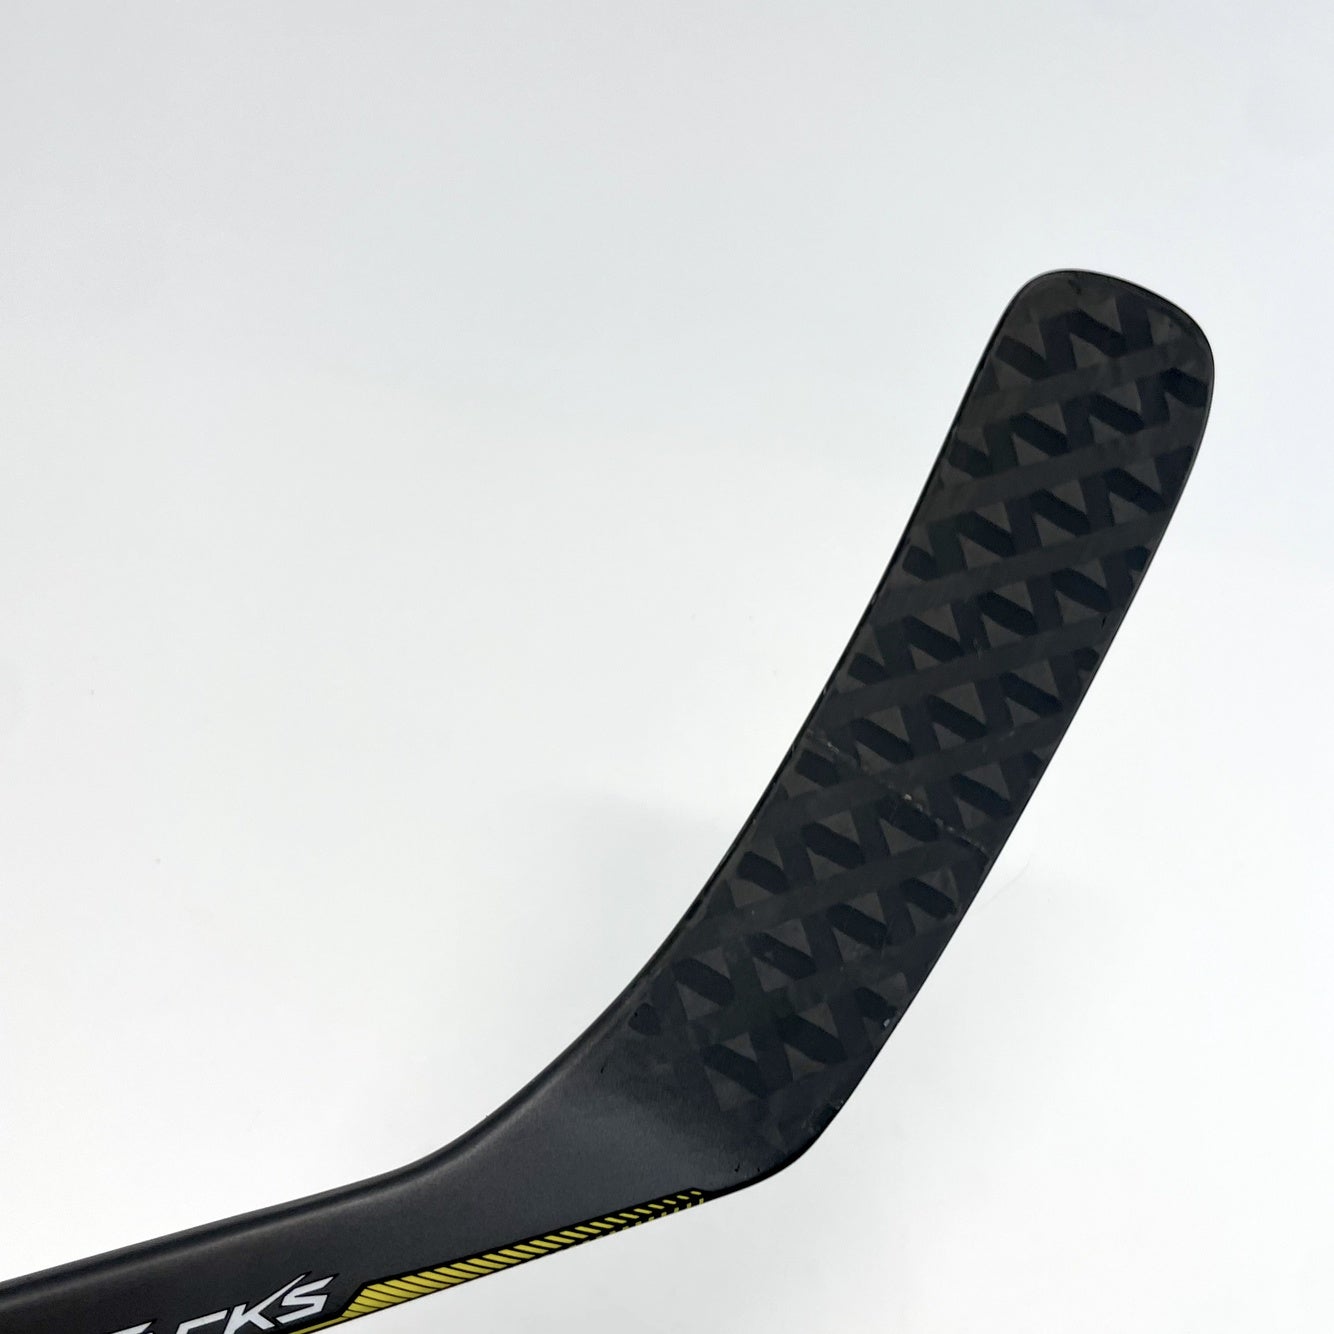 Details about   New Left Hand Ice Hockey Stick Summit Hockey S92 Ovechkin Curve 87 Flex NO GRIP 